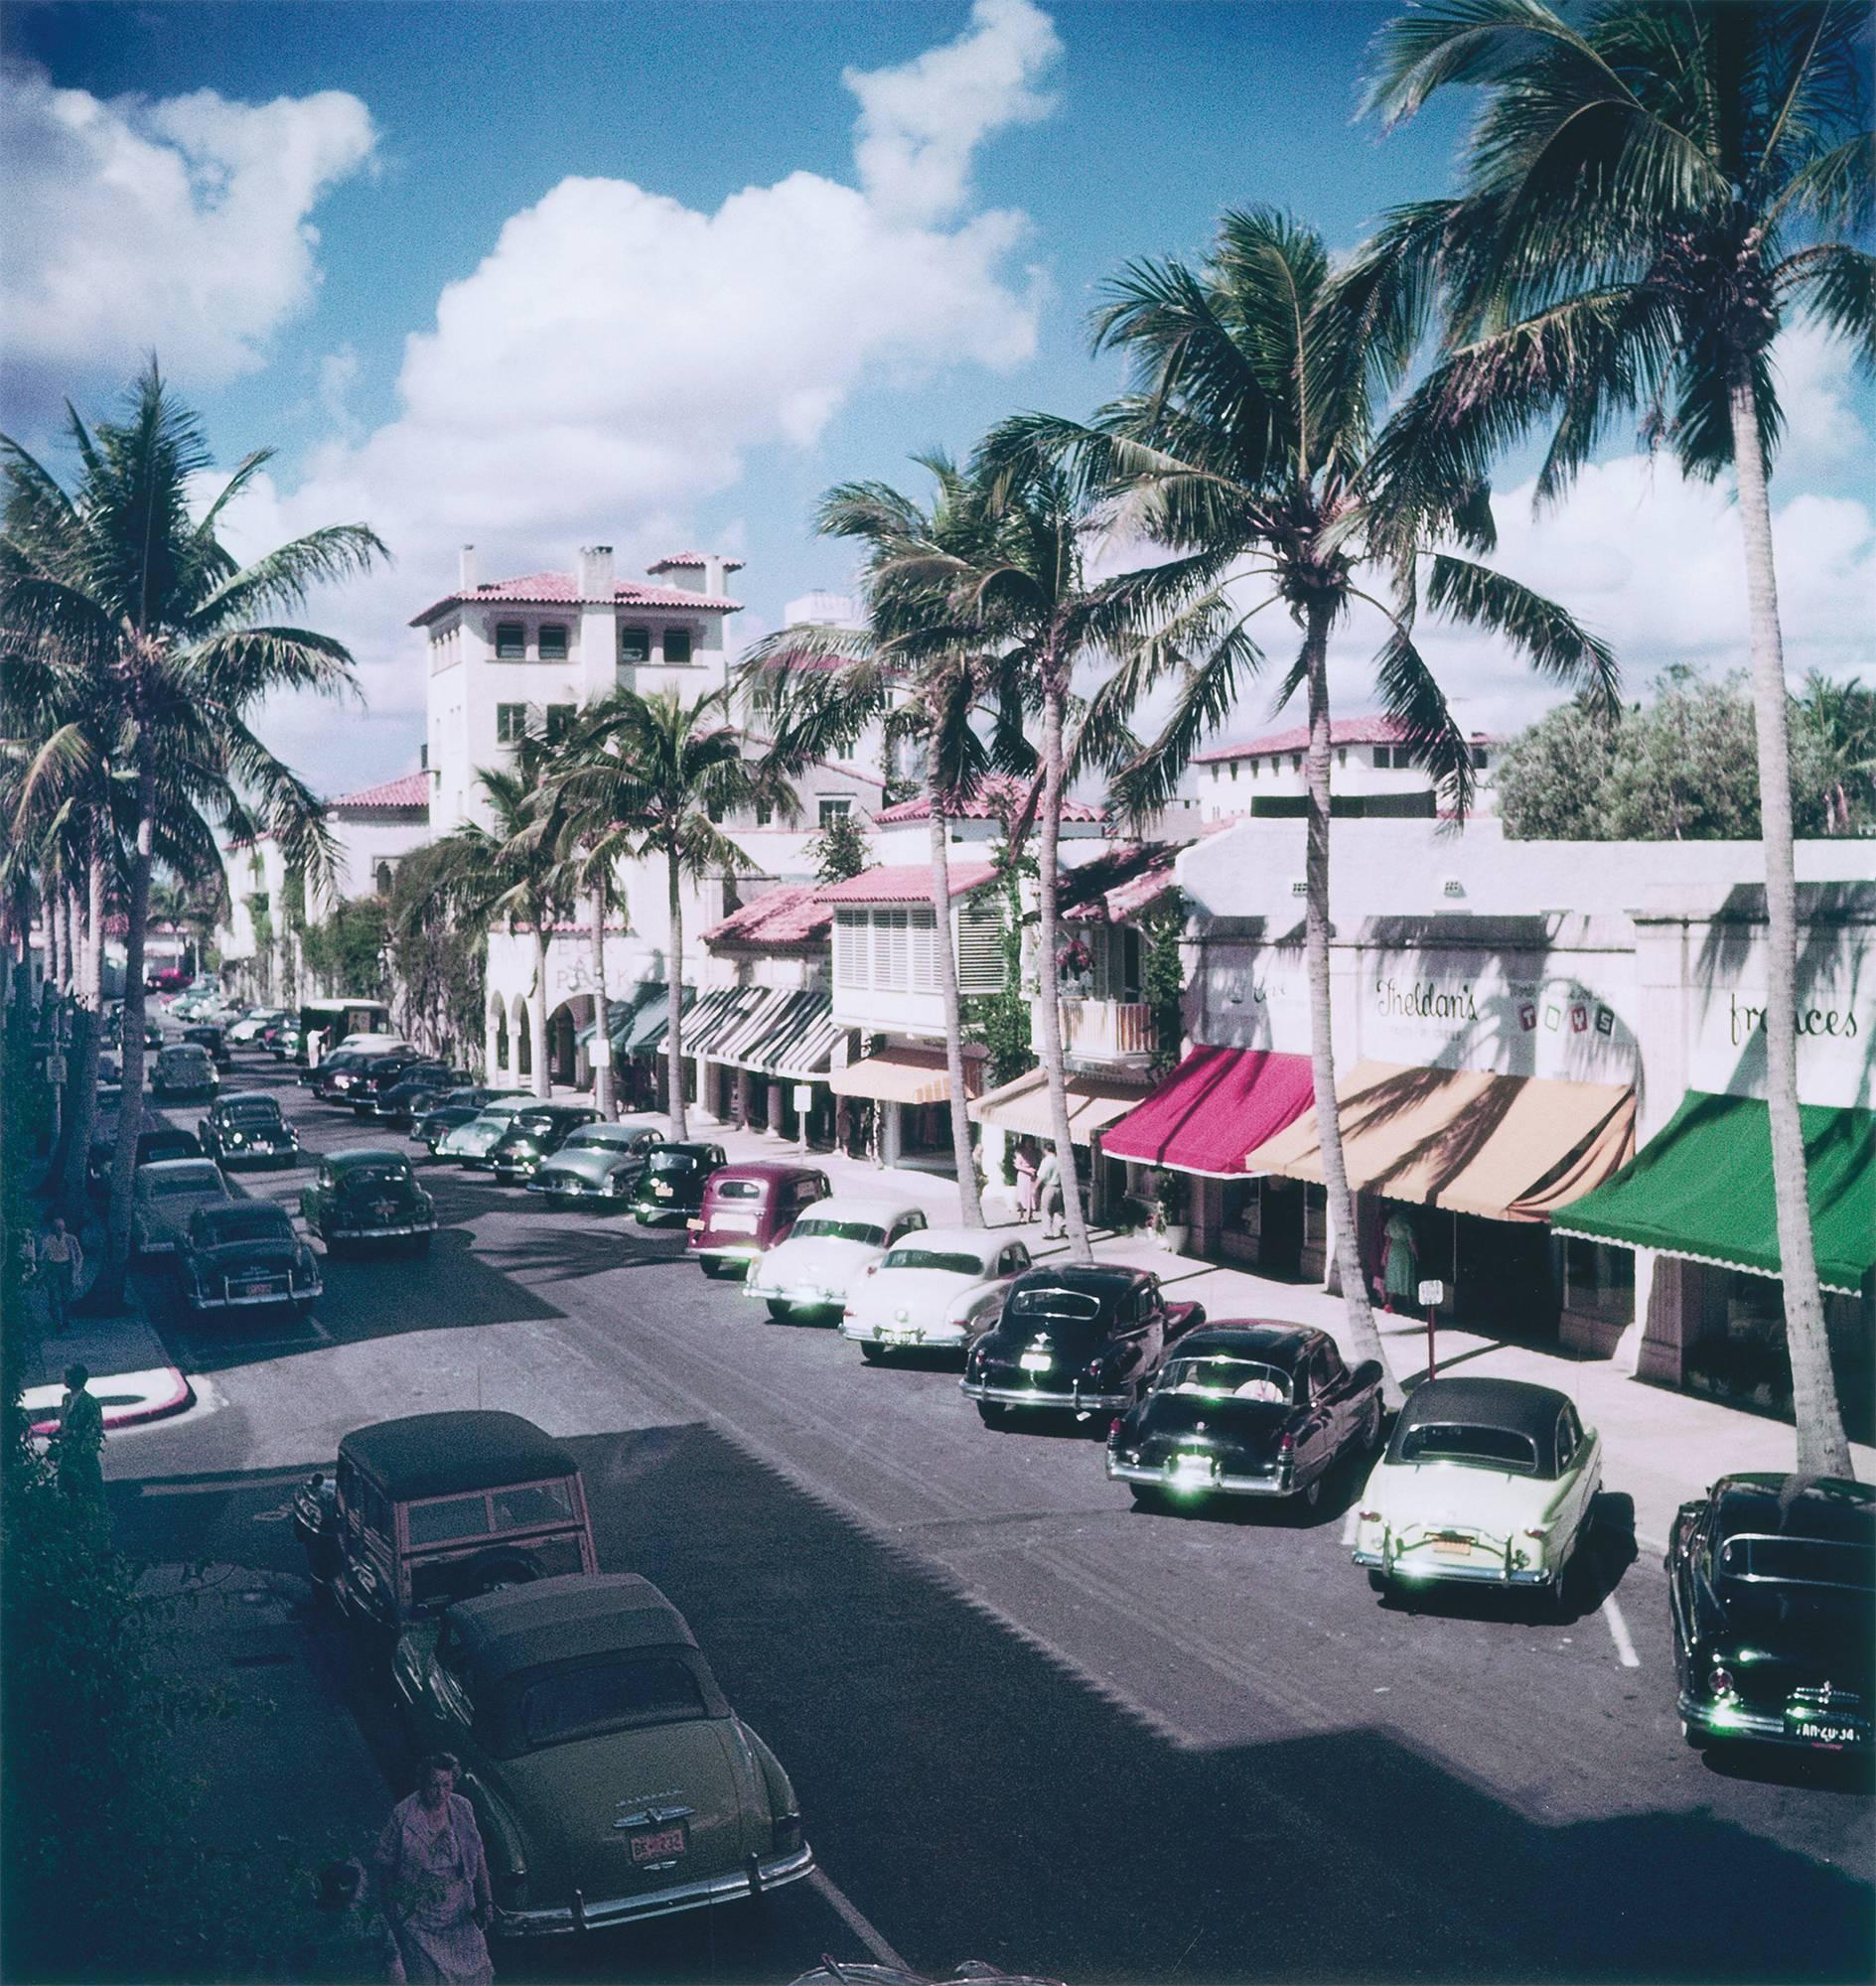 Cars parked on a tree-lined street in Palm Beach, Florida, circa 1953. 
C print
12 x 10 inches
Framed

Estate stamped and hand numbered edition of 150 with certificate of authenticity from the estate.   

Slim Aarons (1916-2006) worked mainly for